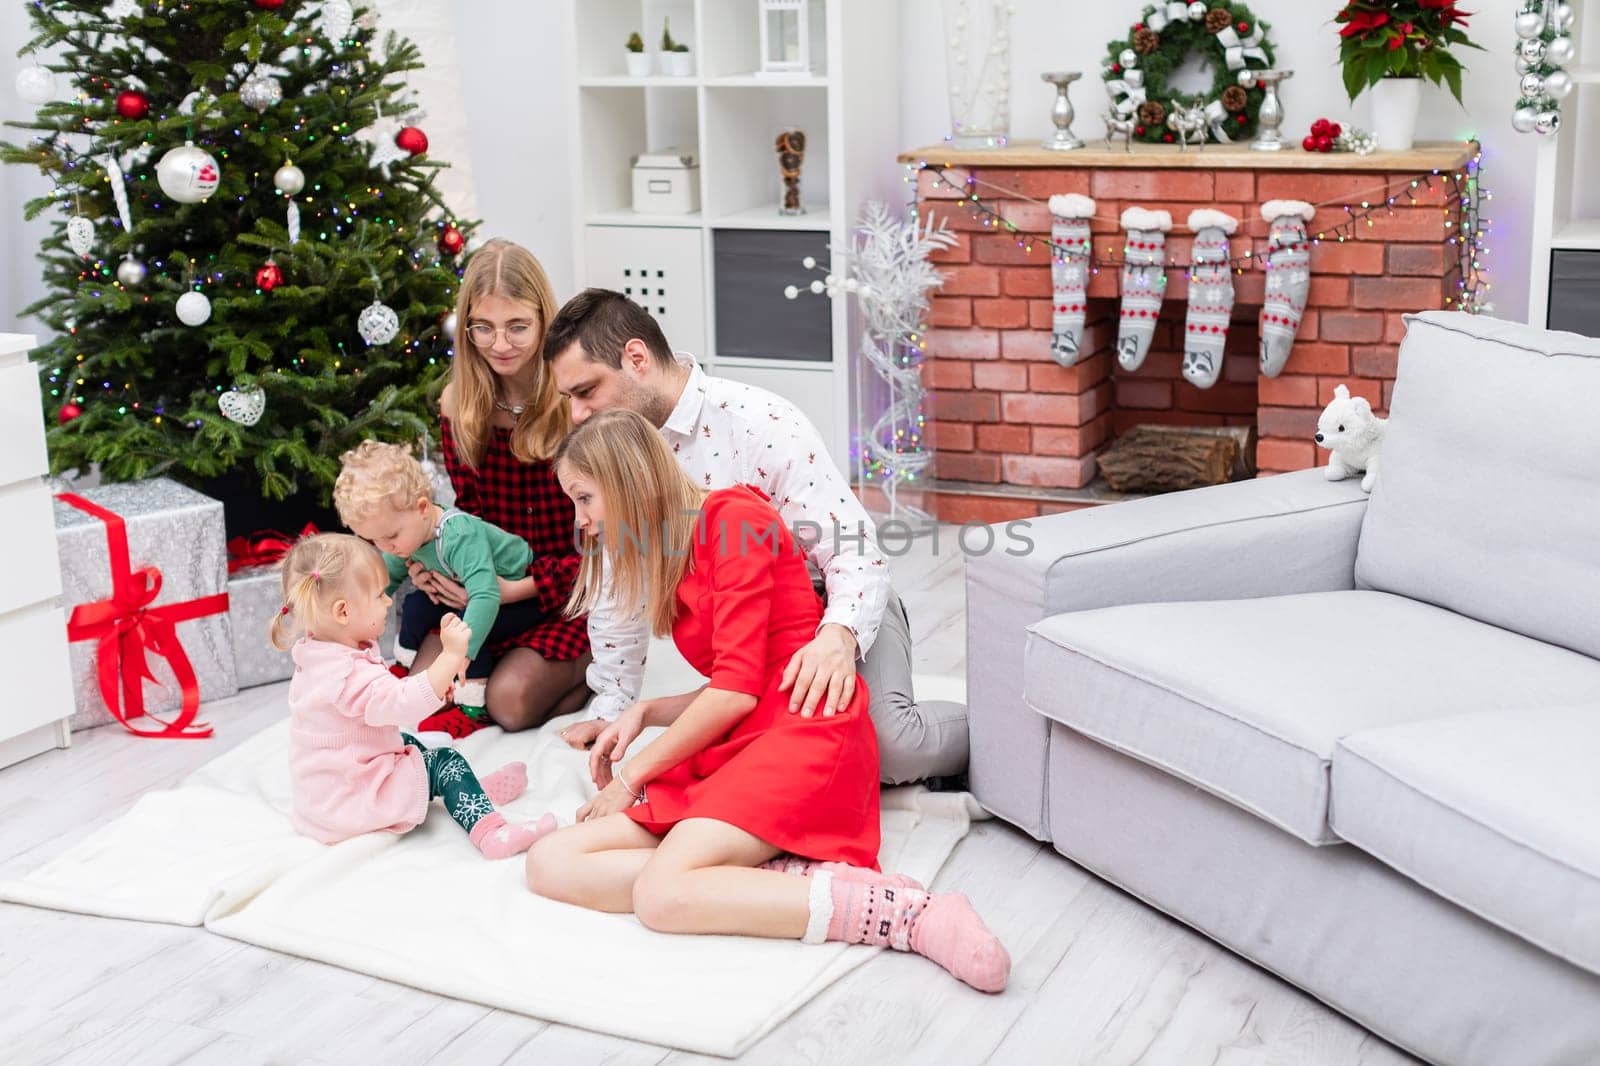 Two women, a man and two children spend Christmas together. The family sits on a white carpet in front of the fireplace. The fireplace is decorated with colorful lights. Presents lie under the large Christmas tree.